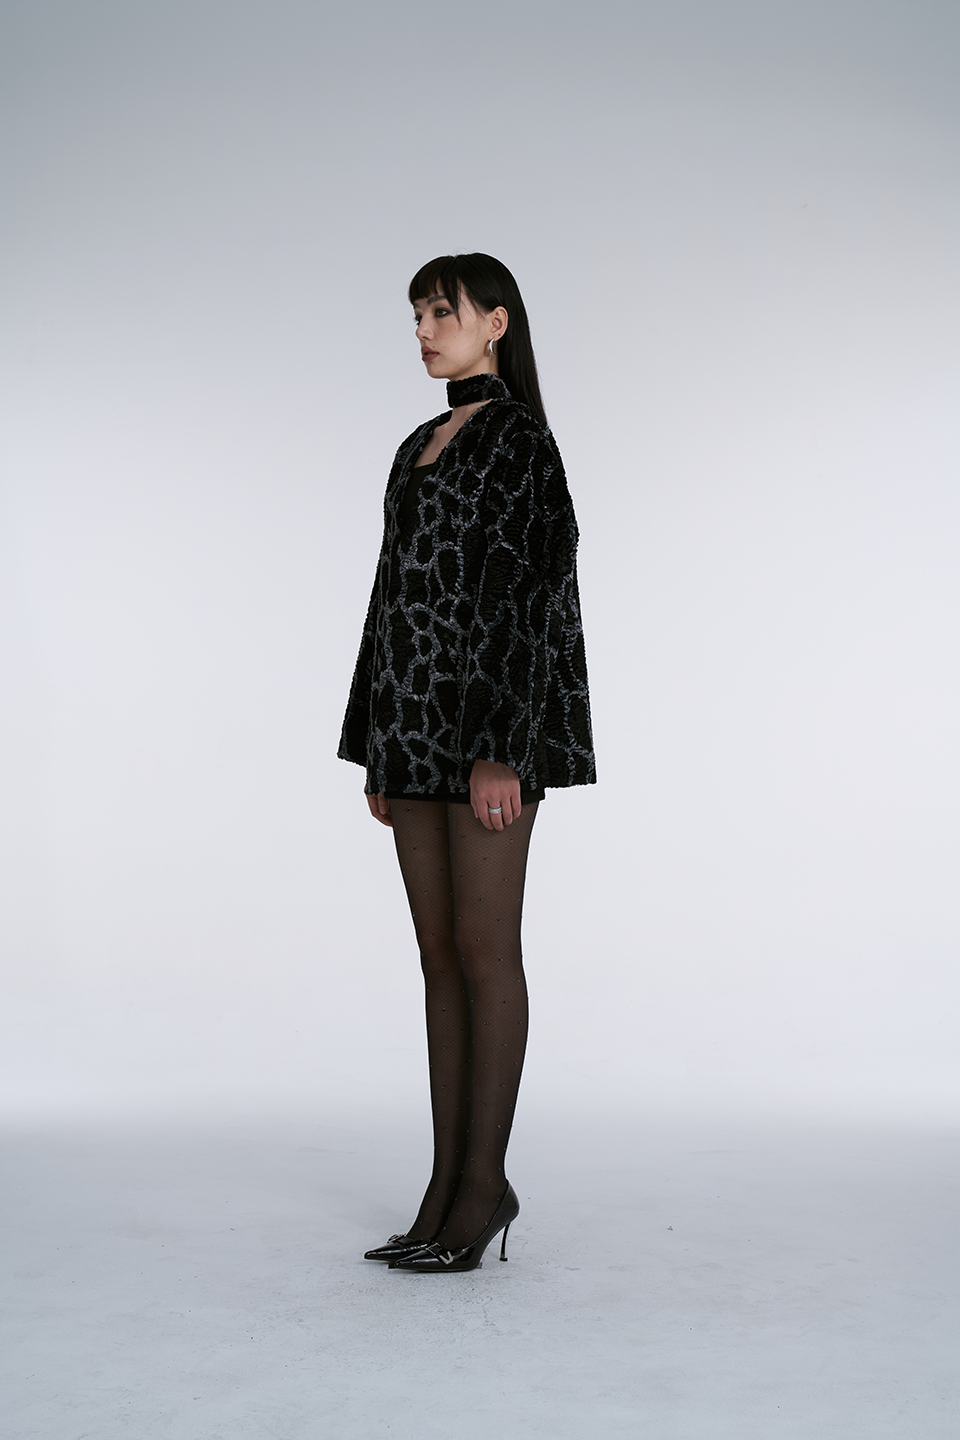 Black Acetate Patterned Outerwear